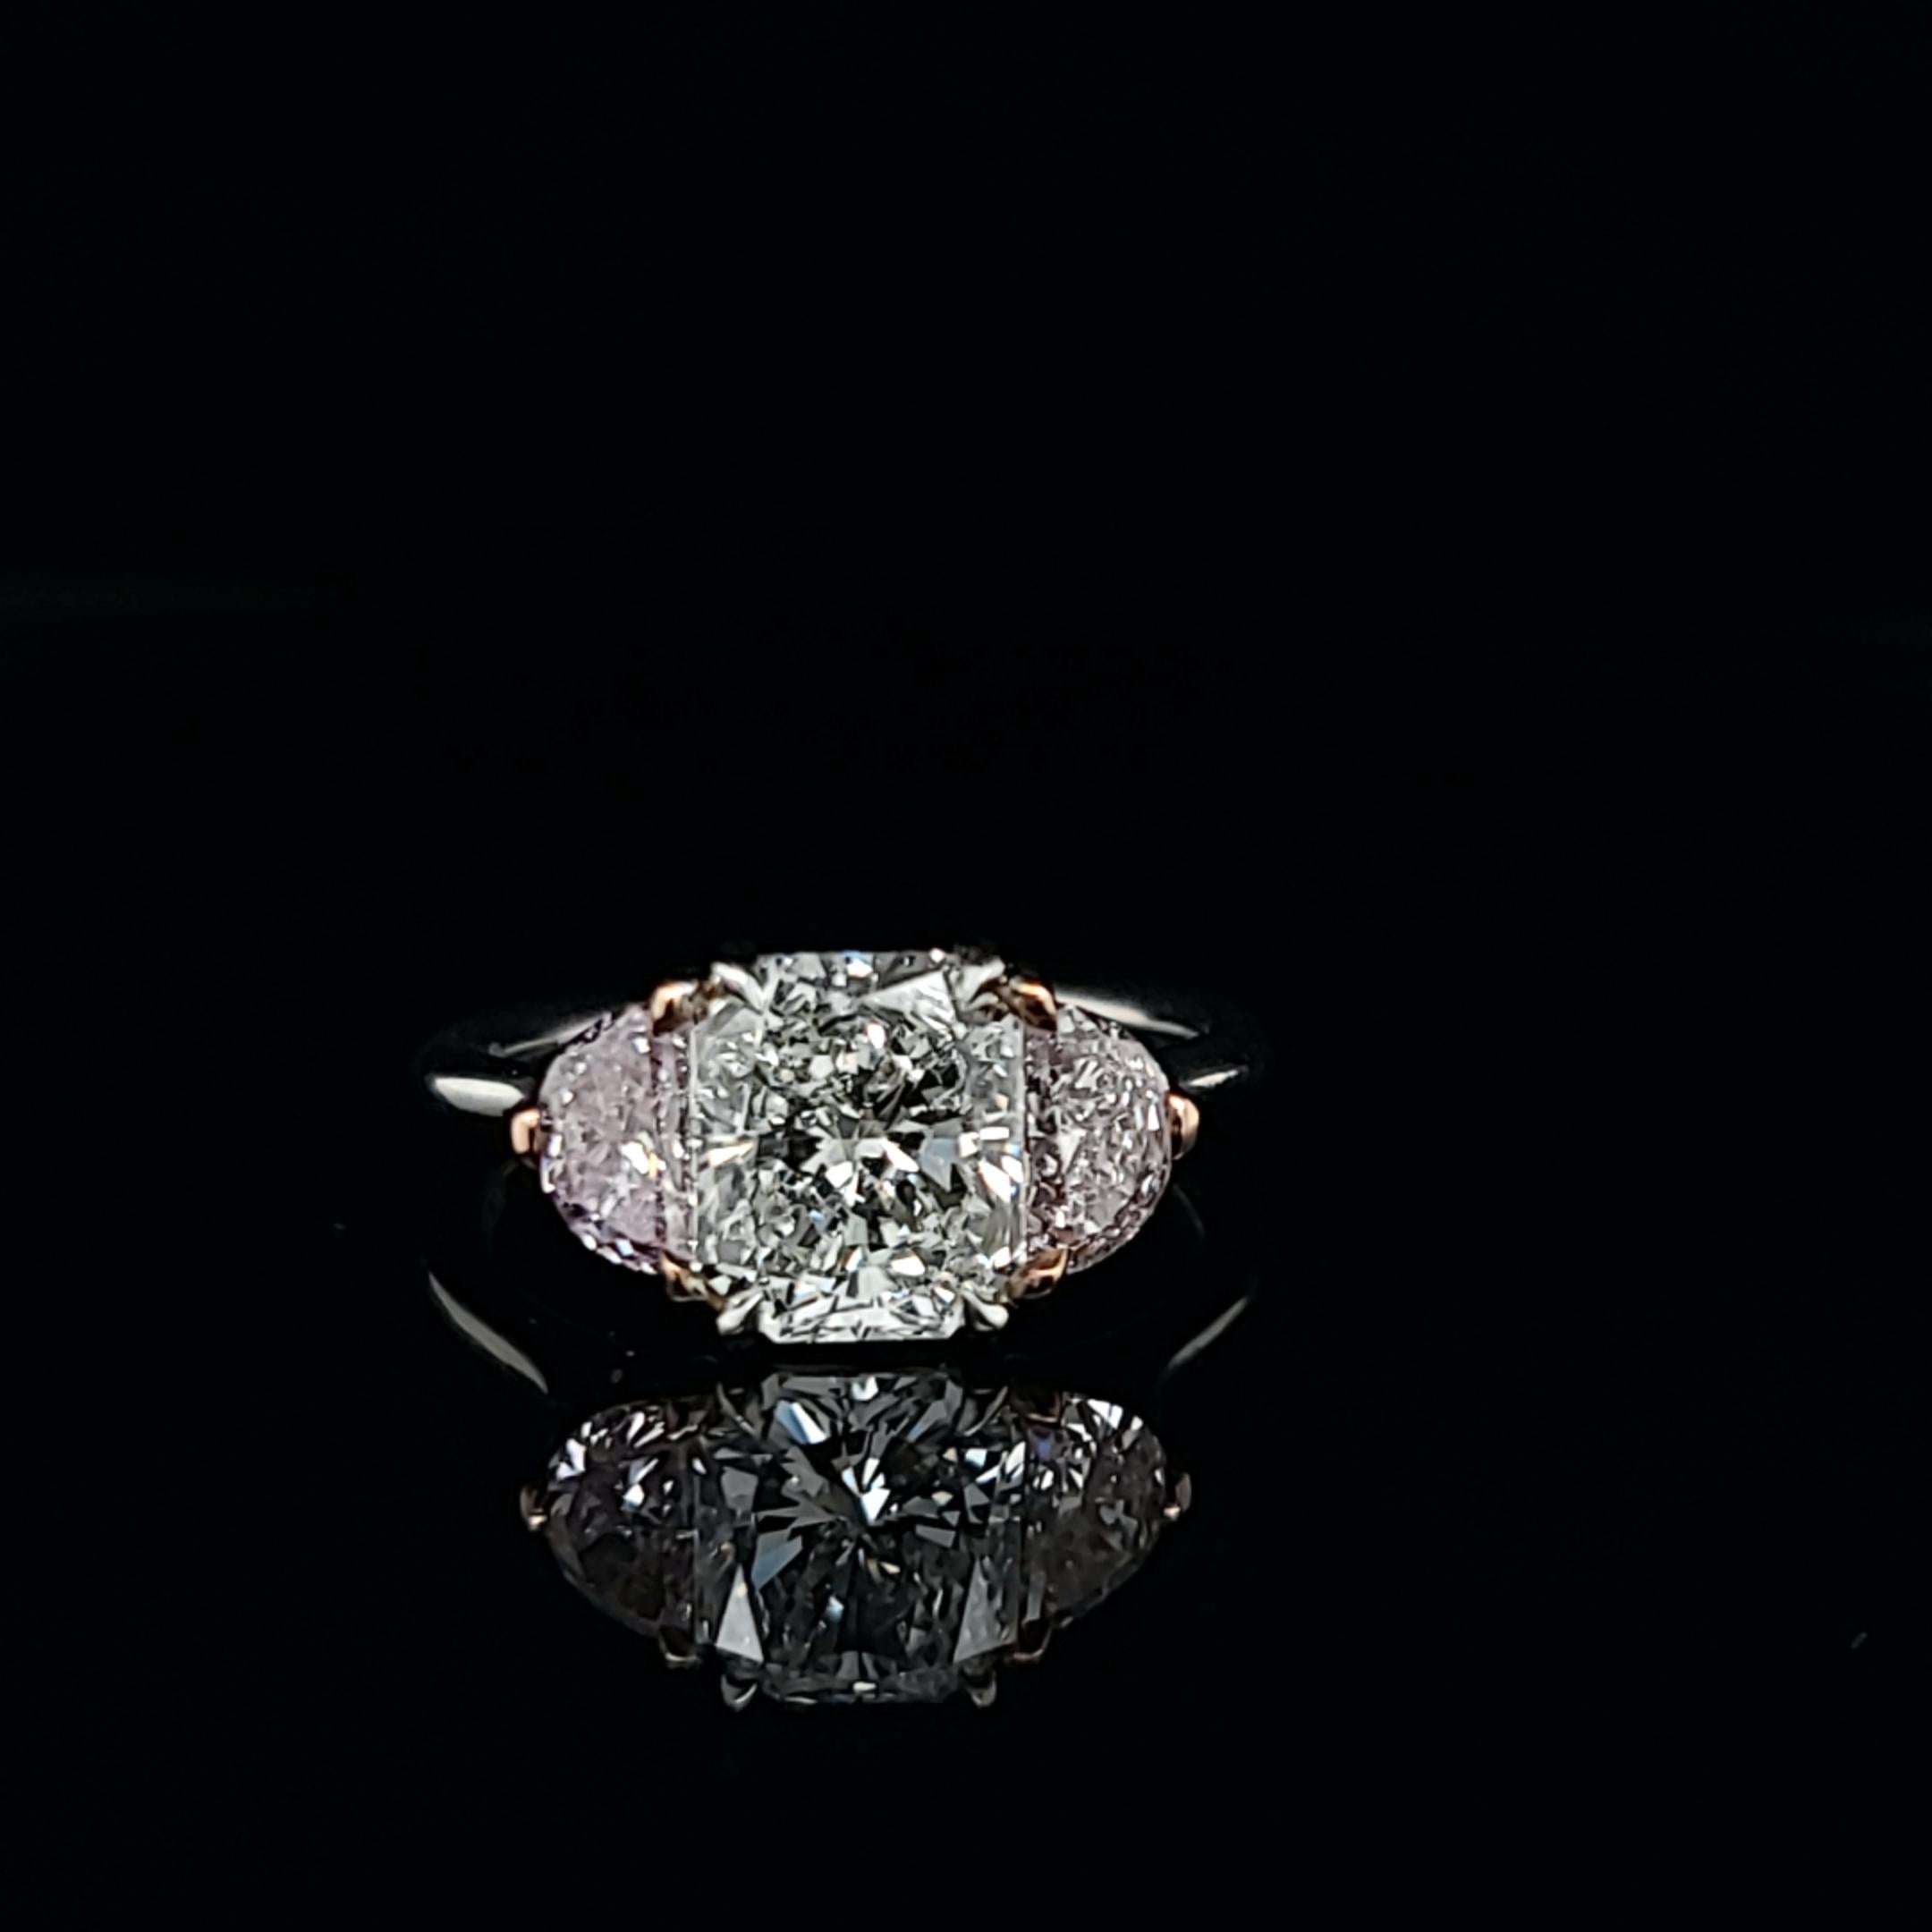 Women's or Men's GIA Certified 2.21 Carat Radiant and Pink Diamond Handmade Engagement Ring